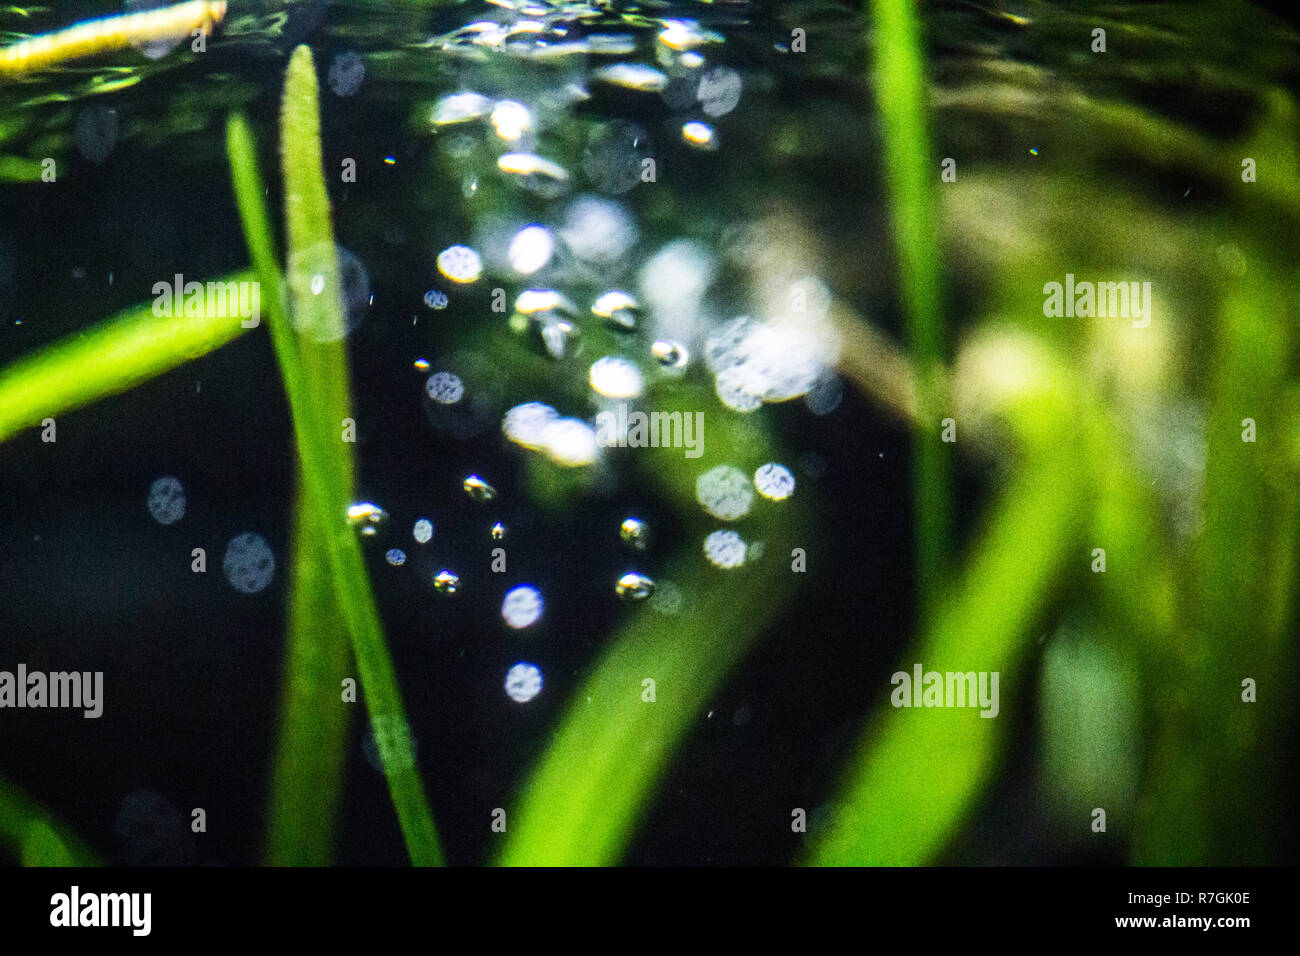 Fish tank water ripple and bubbles Stock Photo